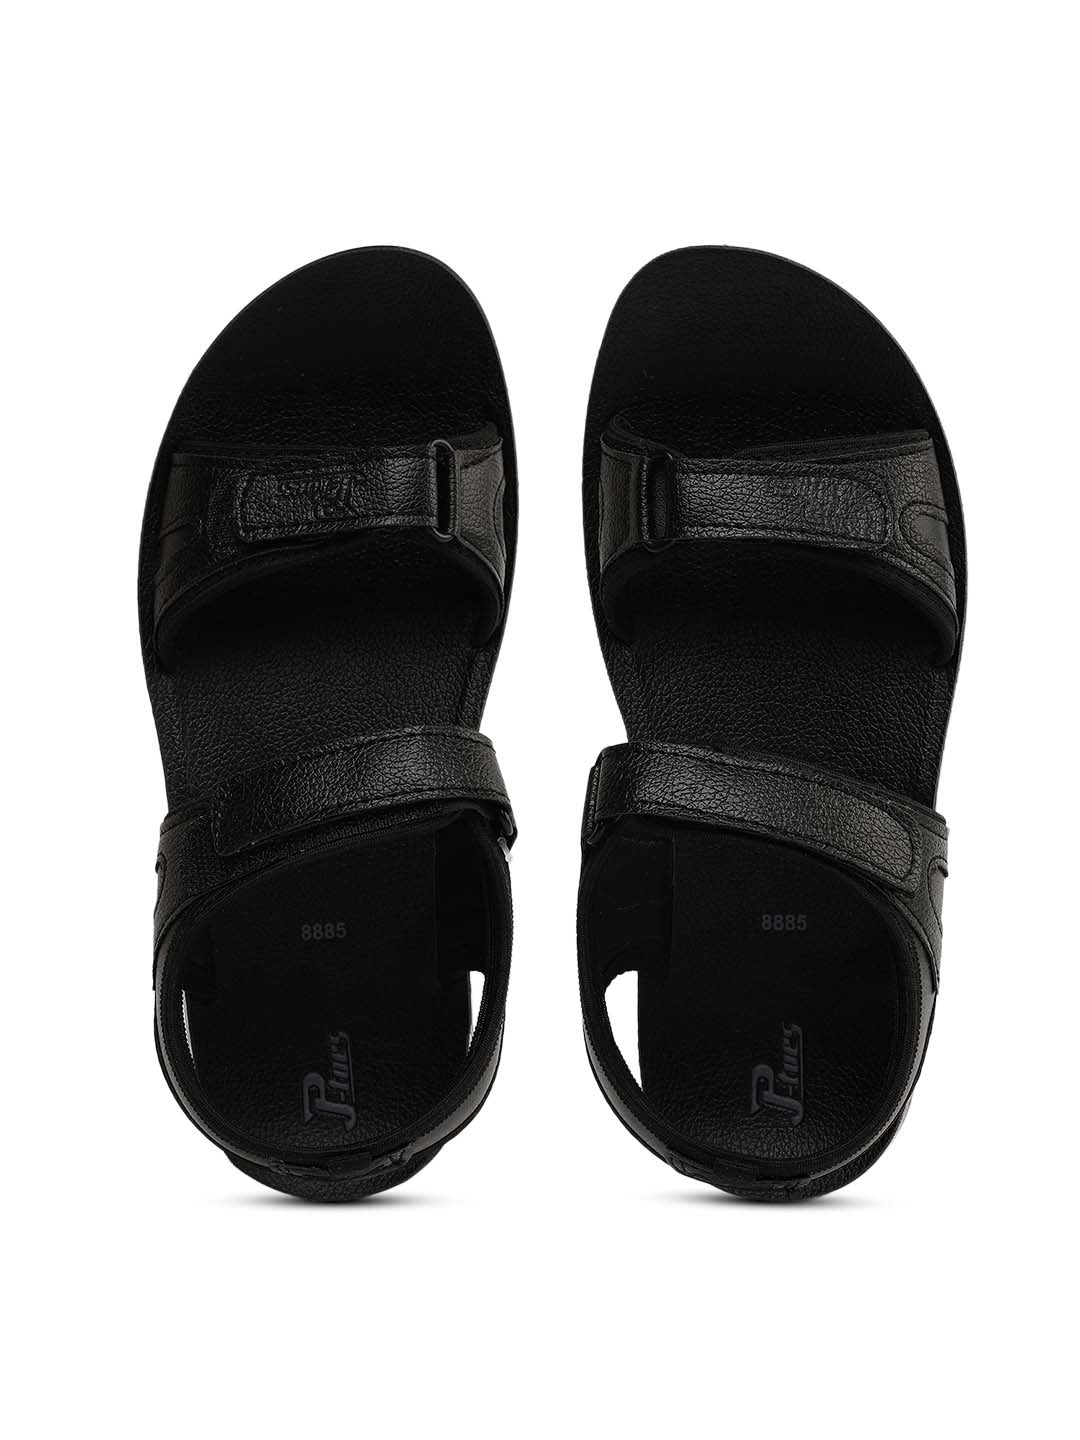 Paragon  PU8885B Kids Casual Fashion Sandals | Comfortable Flat Sandals | Trendy Outdoor Indoor Floaters for Boys &amp; Girls